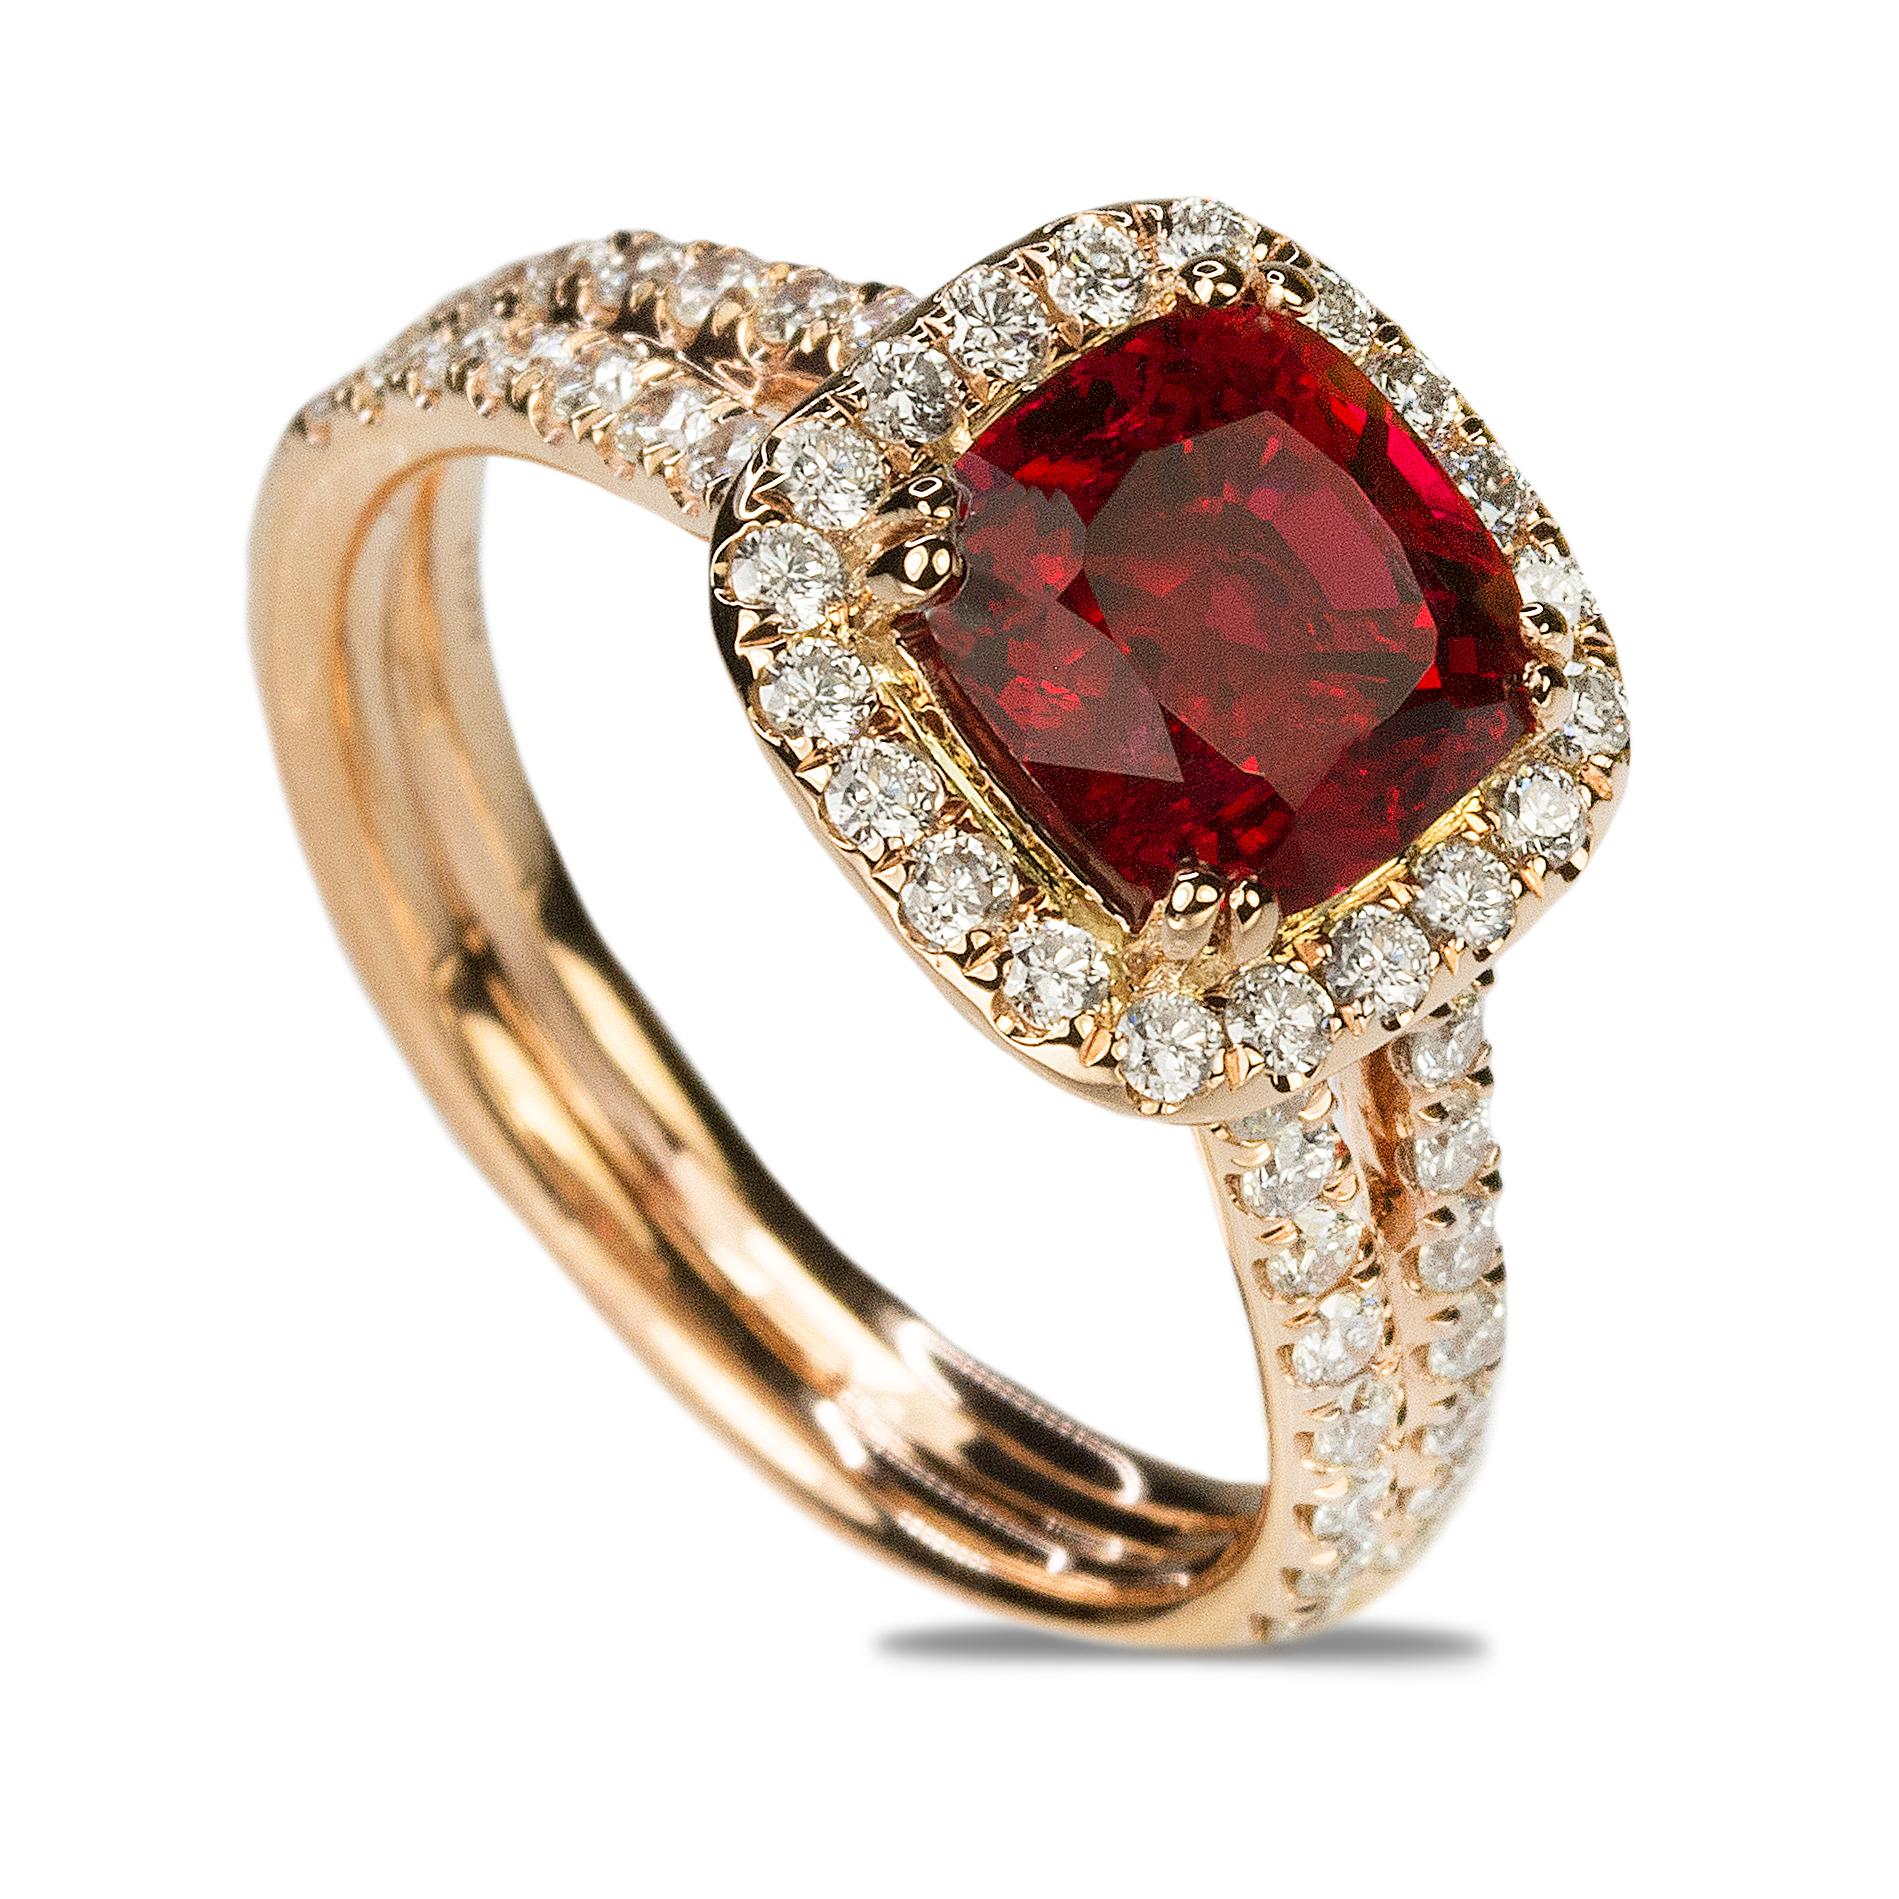 18k Rose Gold Ring with one GIA certified 2.19 carat Burma Red Spinel, set with 52 round brilliant diamonds weighing 1.06 carats. This is the finest Burma Red Spinel we have ever had!